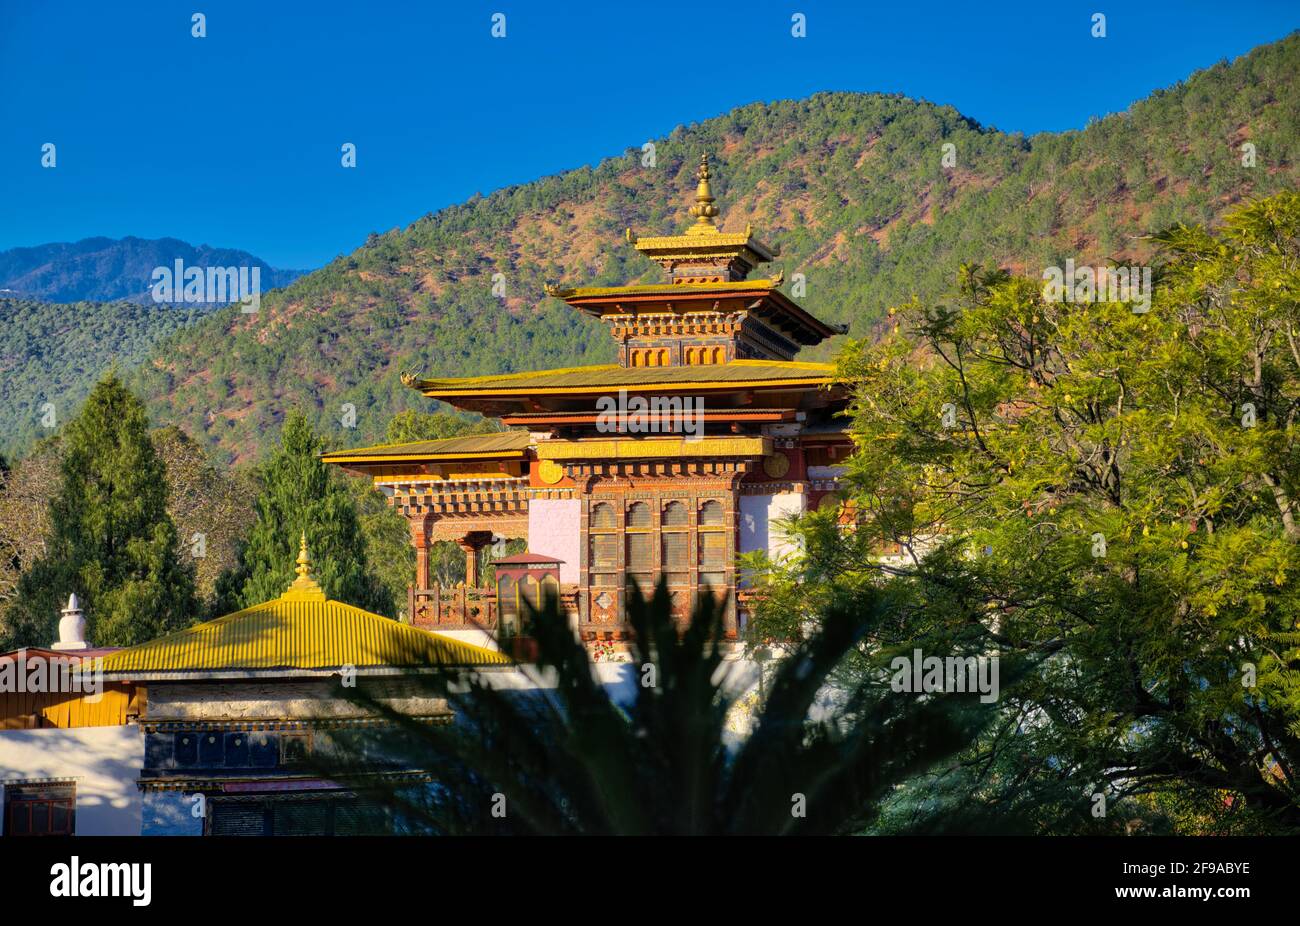 Punakha valley has a pleasant climate with warm winters and hot summers. It is located at an average elevation of 1200 m above sea level. Owing to the Stock Photo